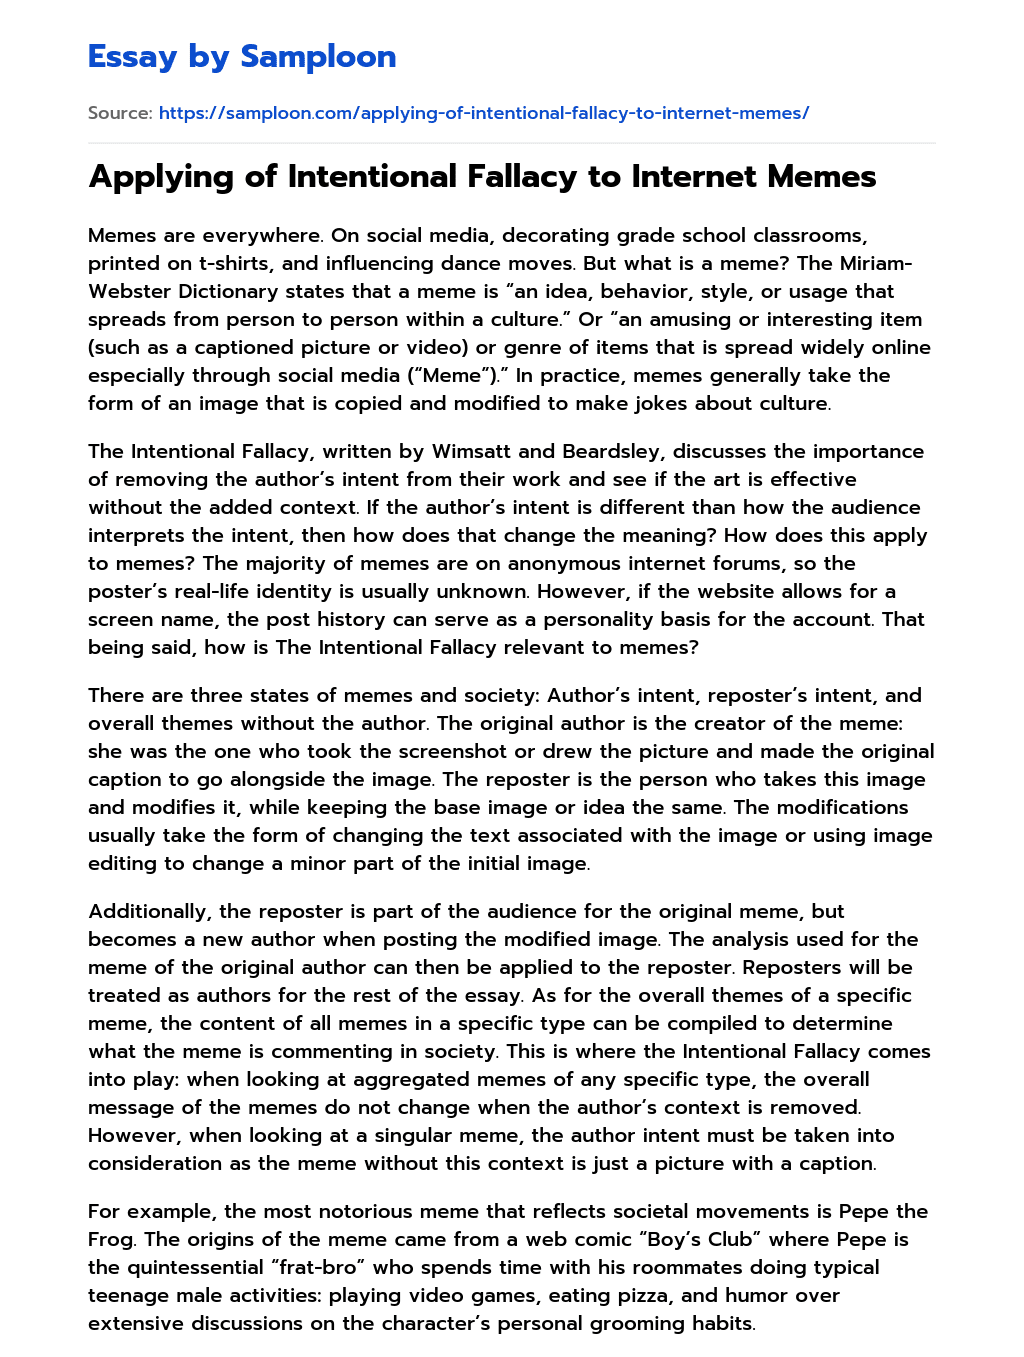 Applying of Intentional Fallacy to Internet Memes essay